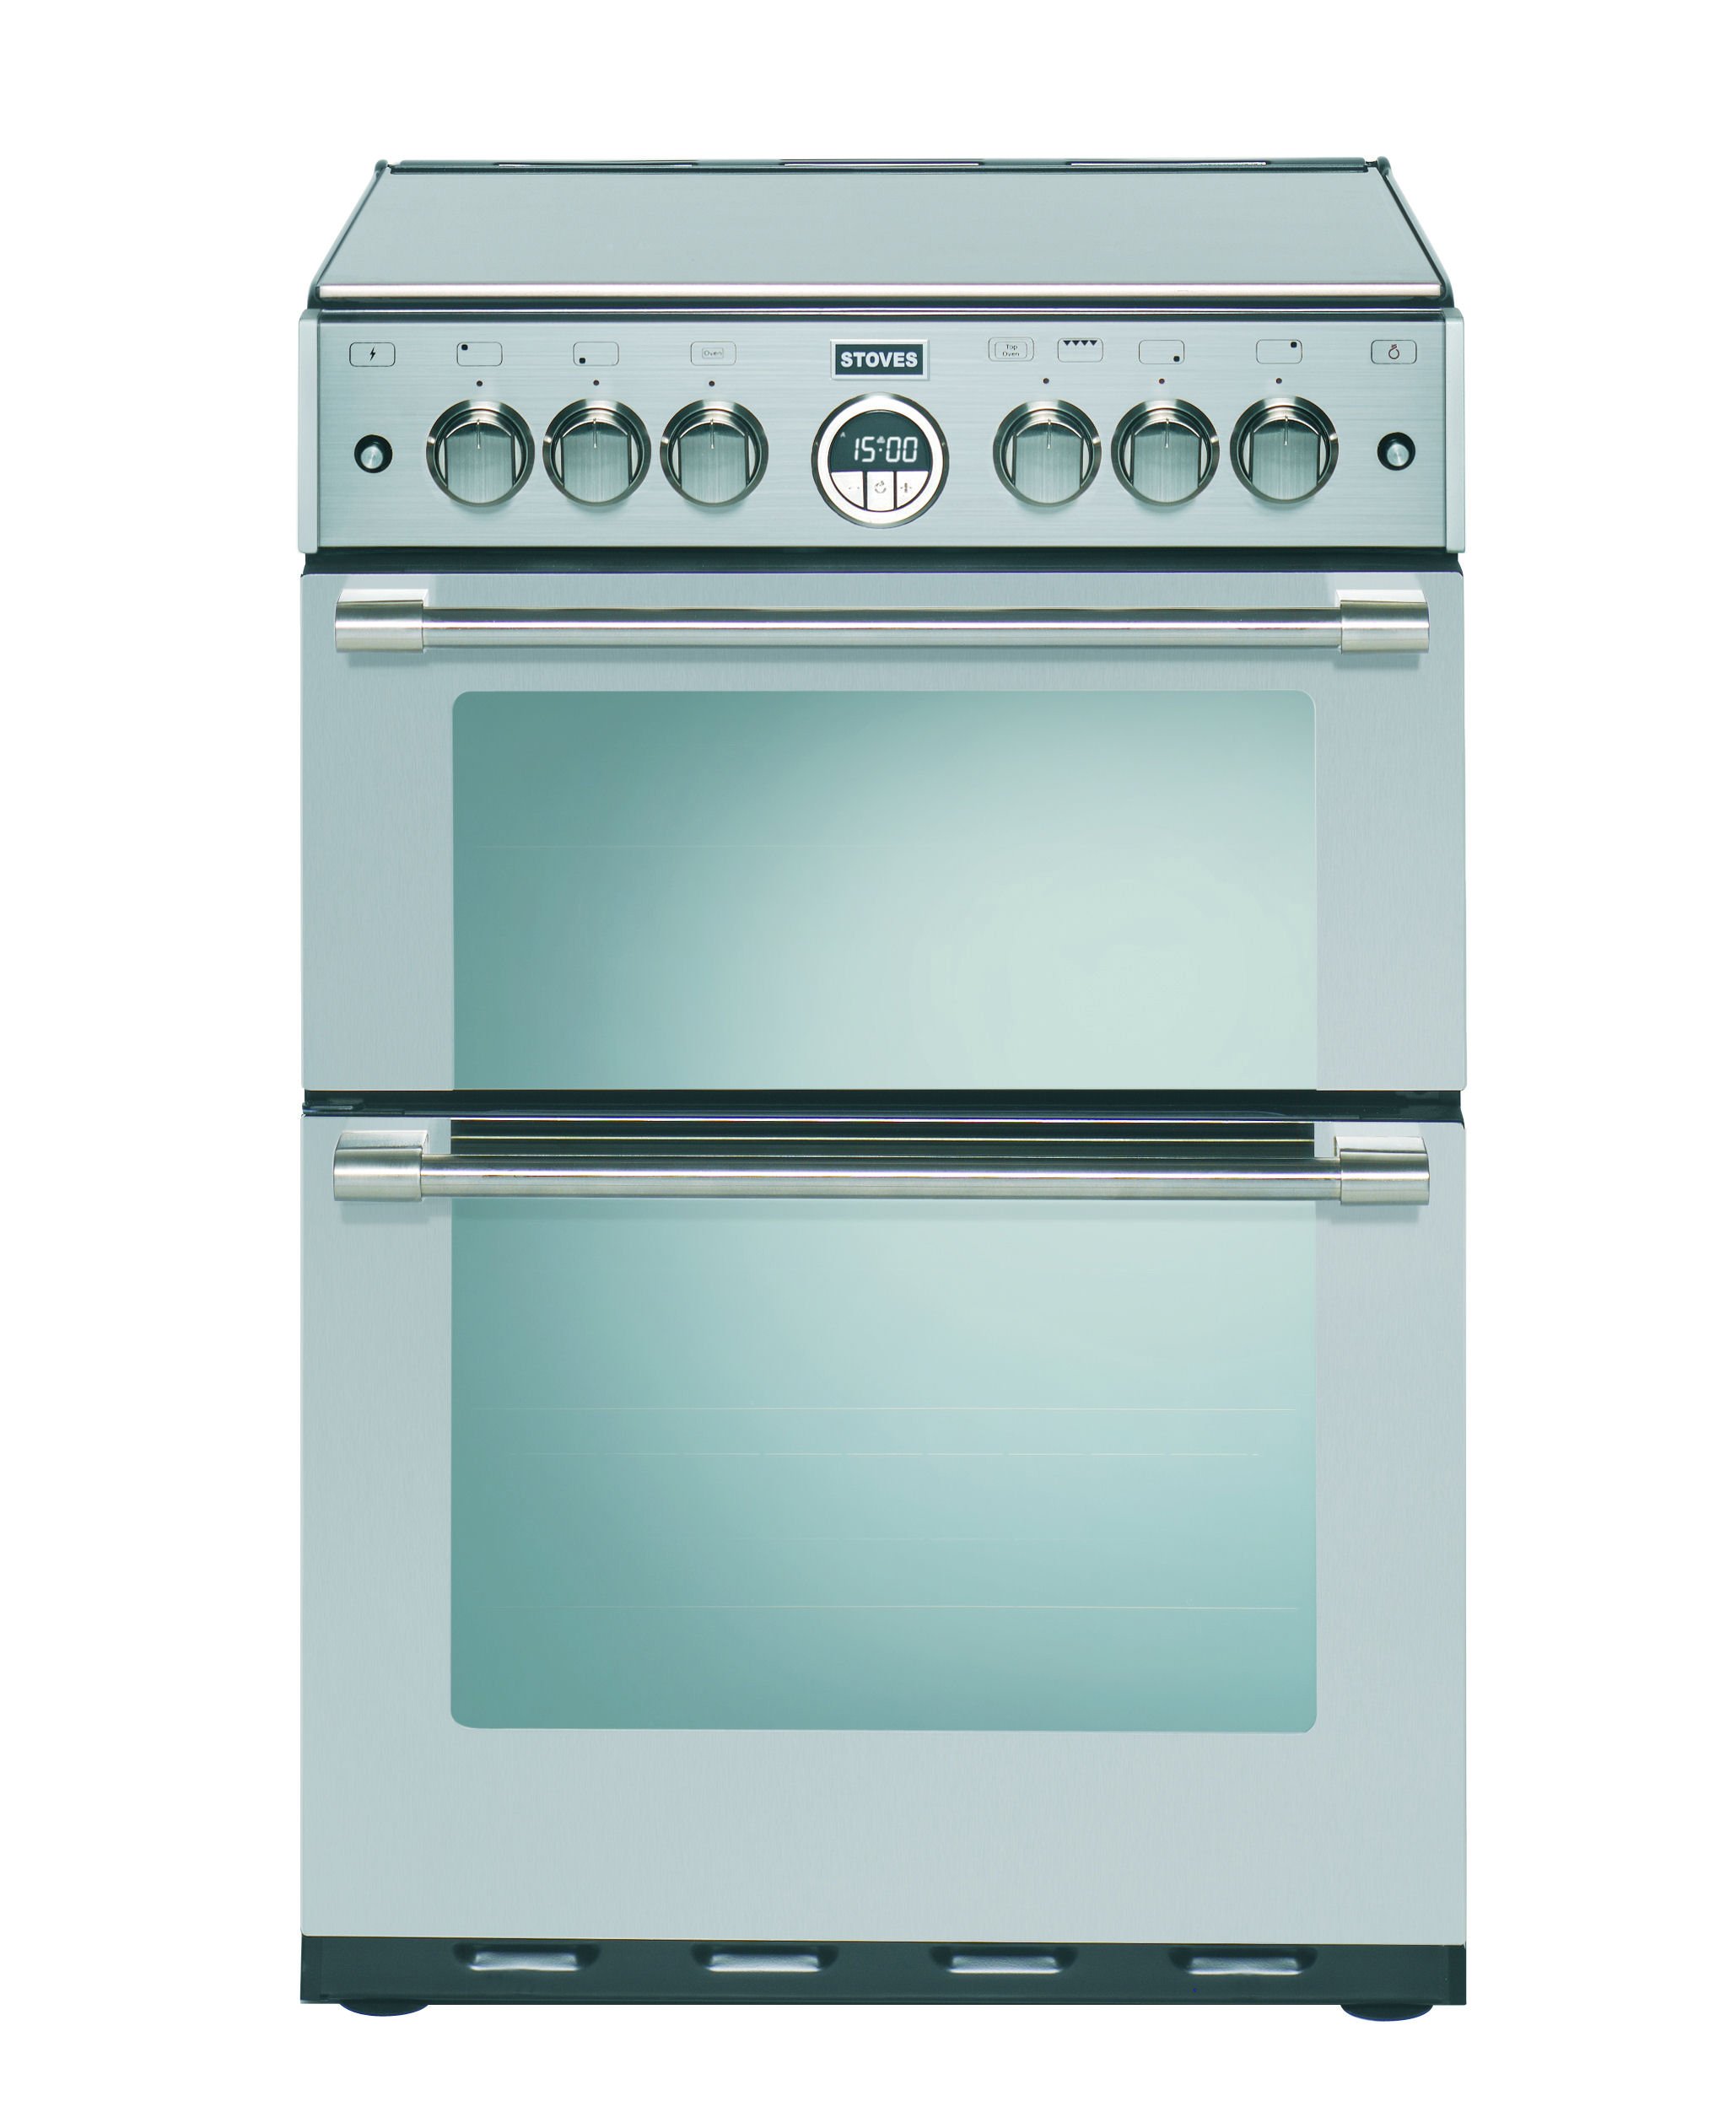 60cm Gas Range Cooker With Glass Lid, 4 Burner Gas Hob, Conventional Gas Oven & Electric Grill and Conventional Gas Main Oven